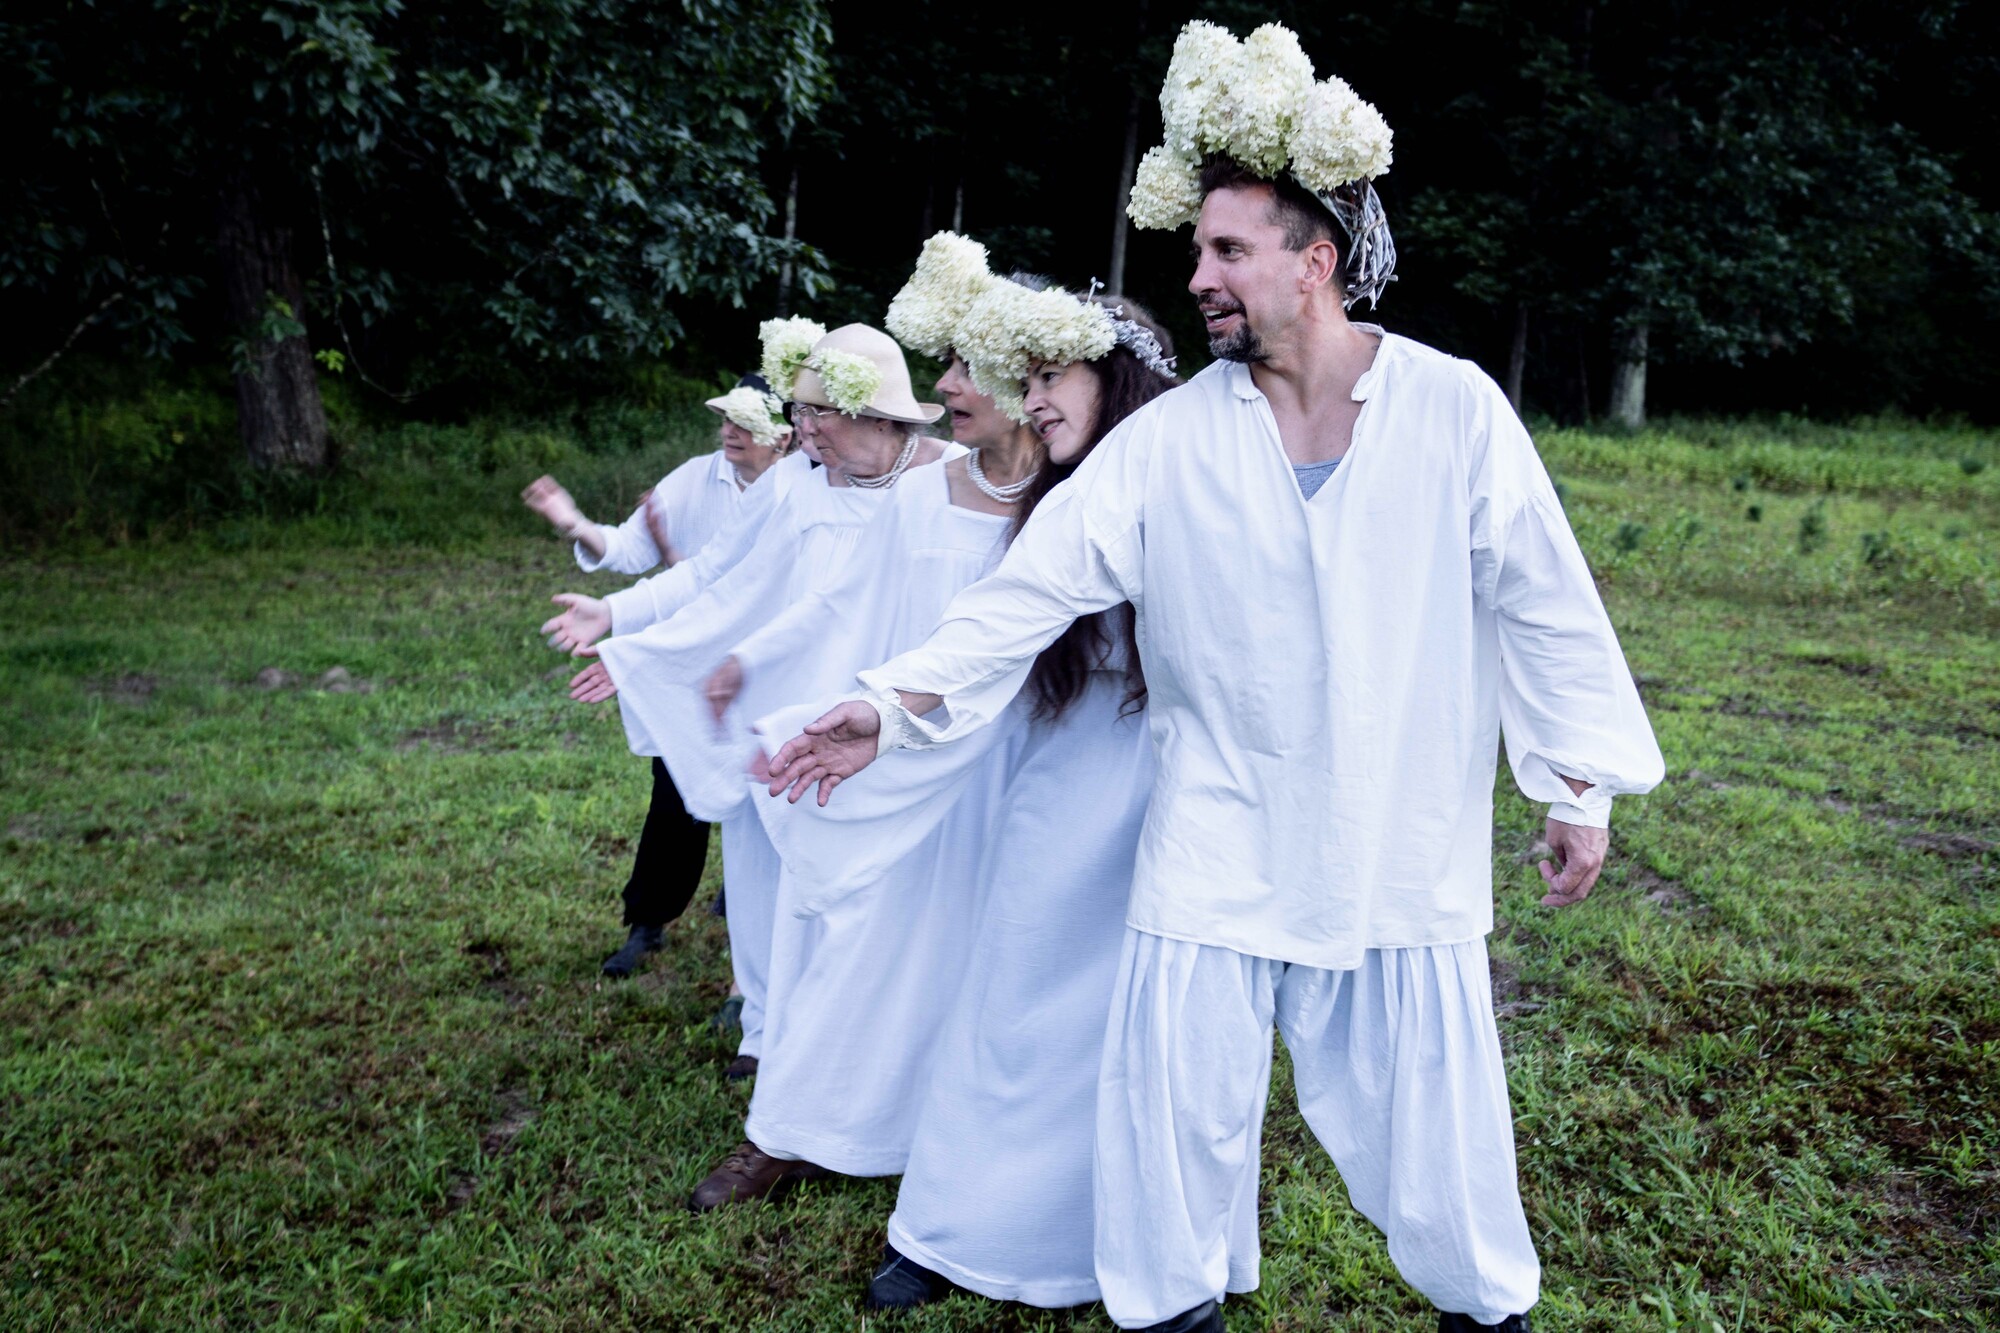 Performers in white with floral headpieces stand in a field.